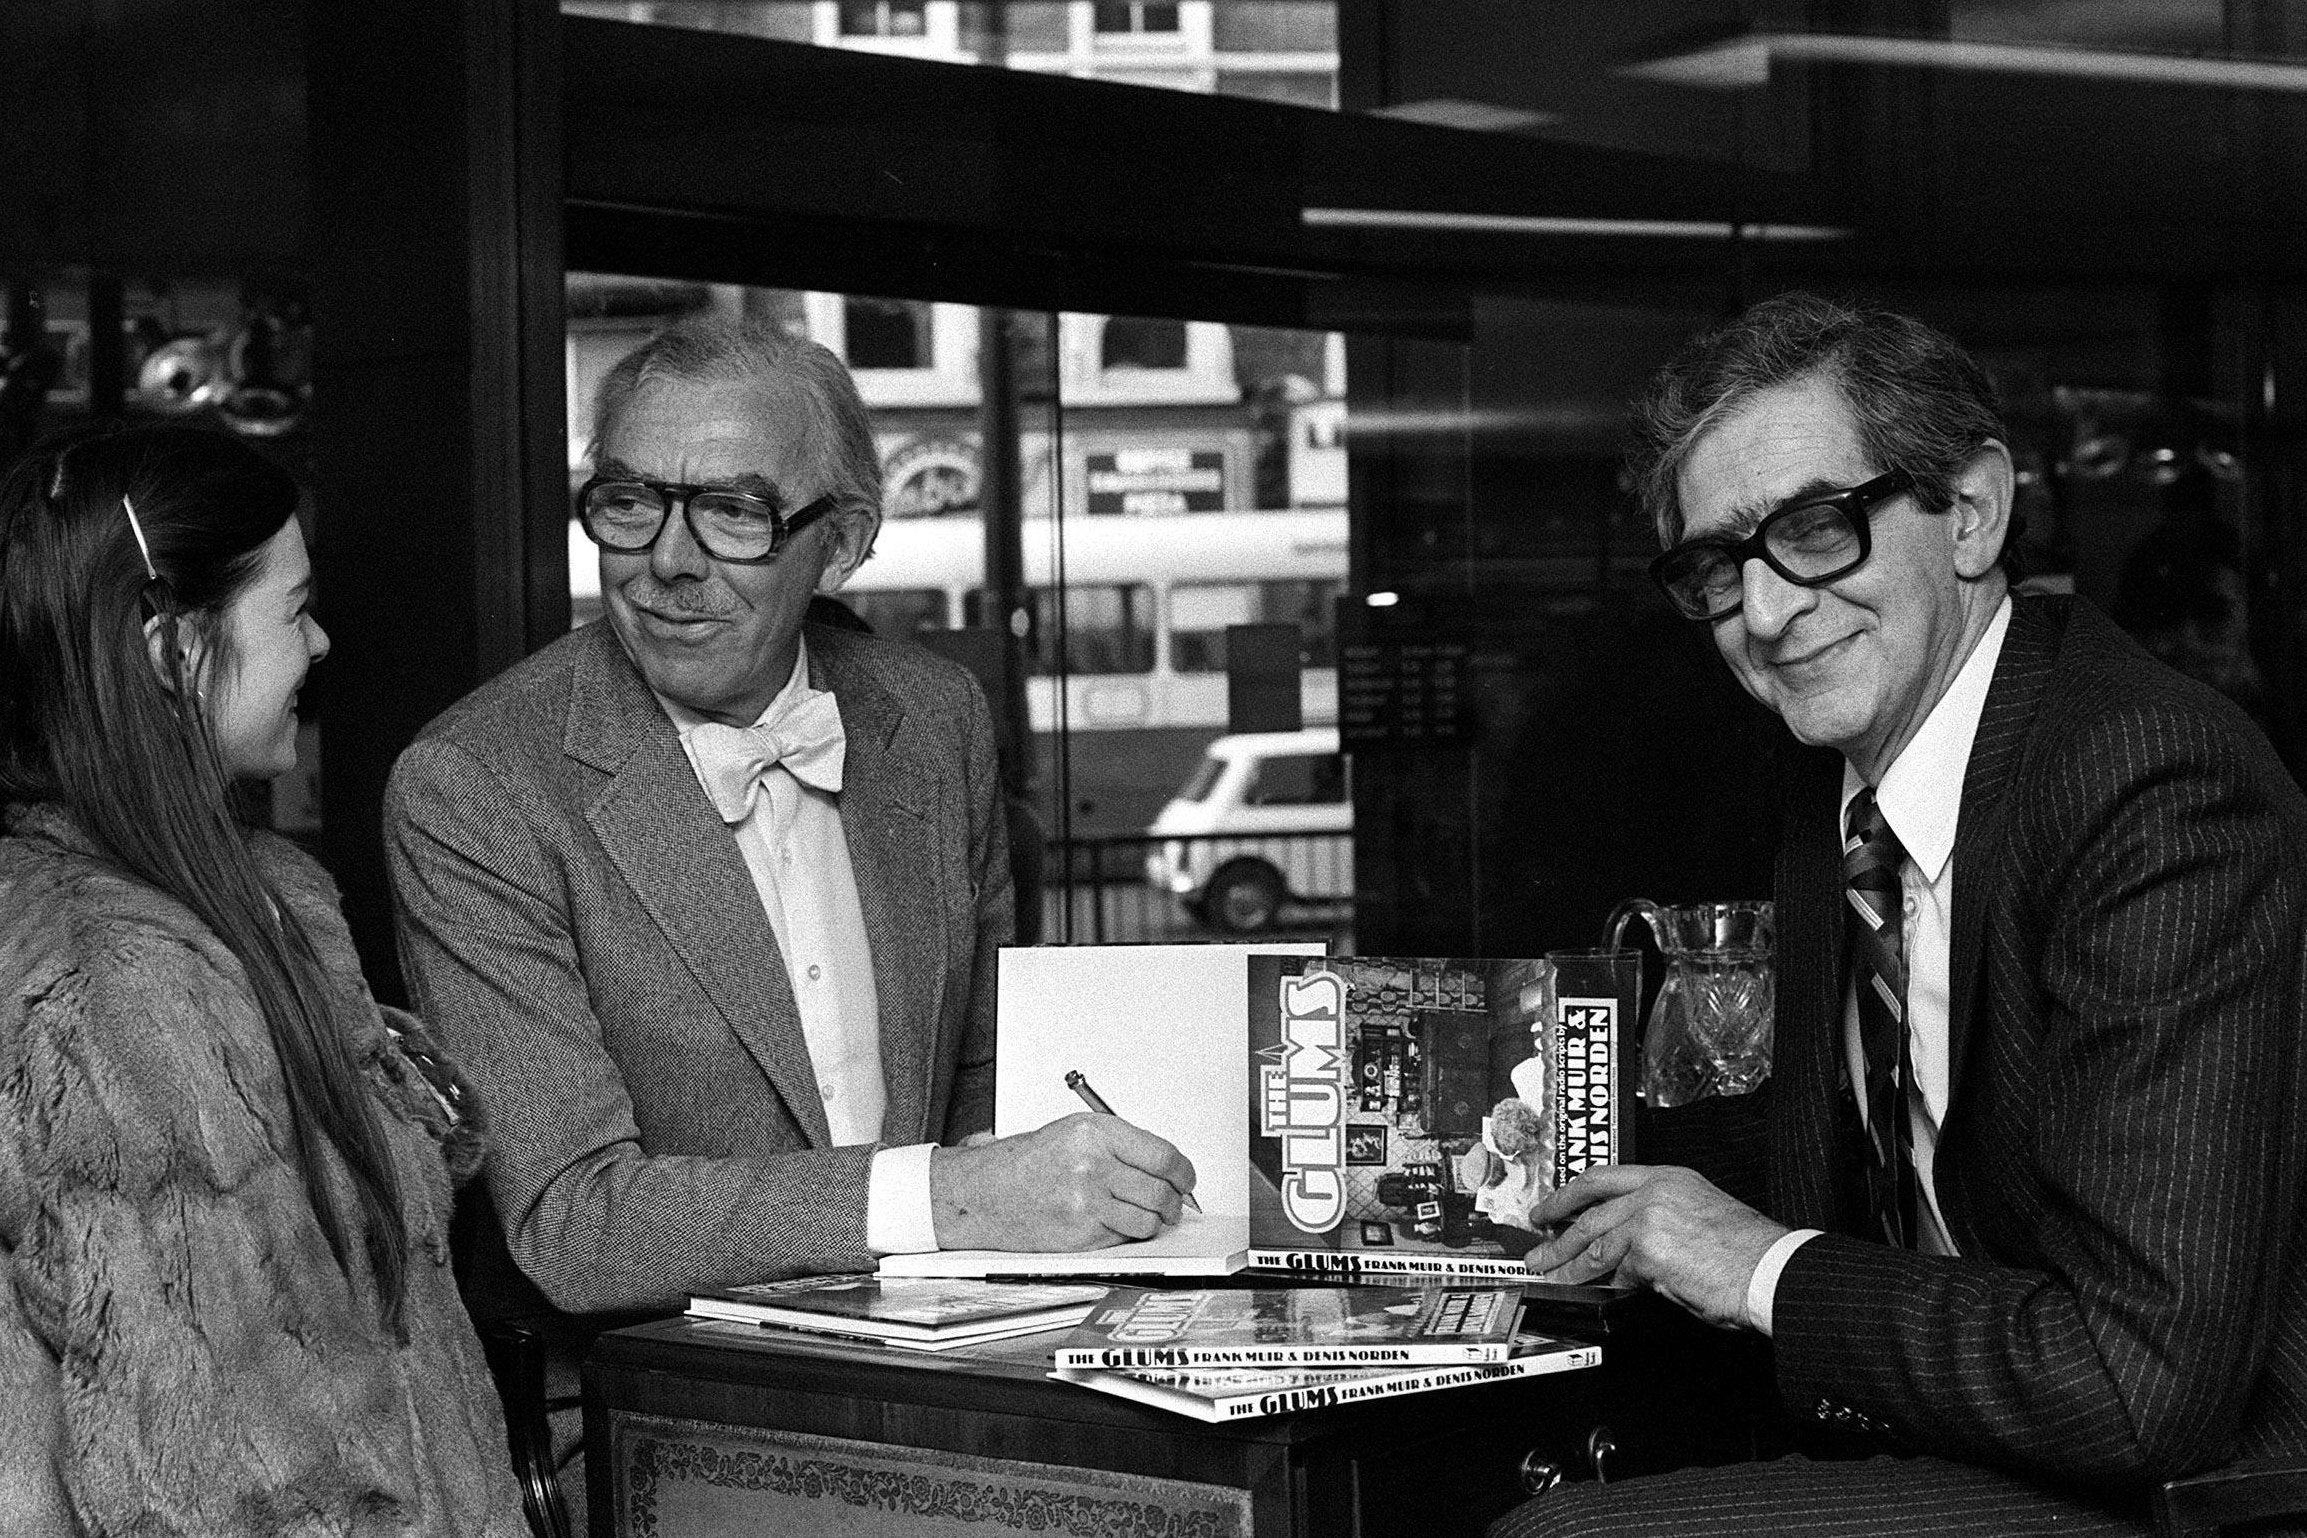 &#13;
Frank Muir and Denis Norden (right) at a store in London's Kensignton High Street, signing copies of their book "The Glums" from the TV series (PA Archive/PA Images)&#13;